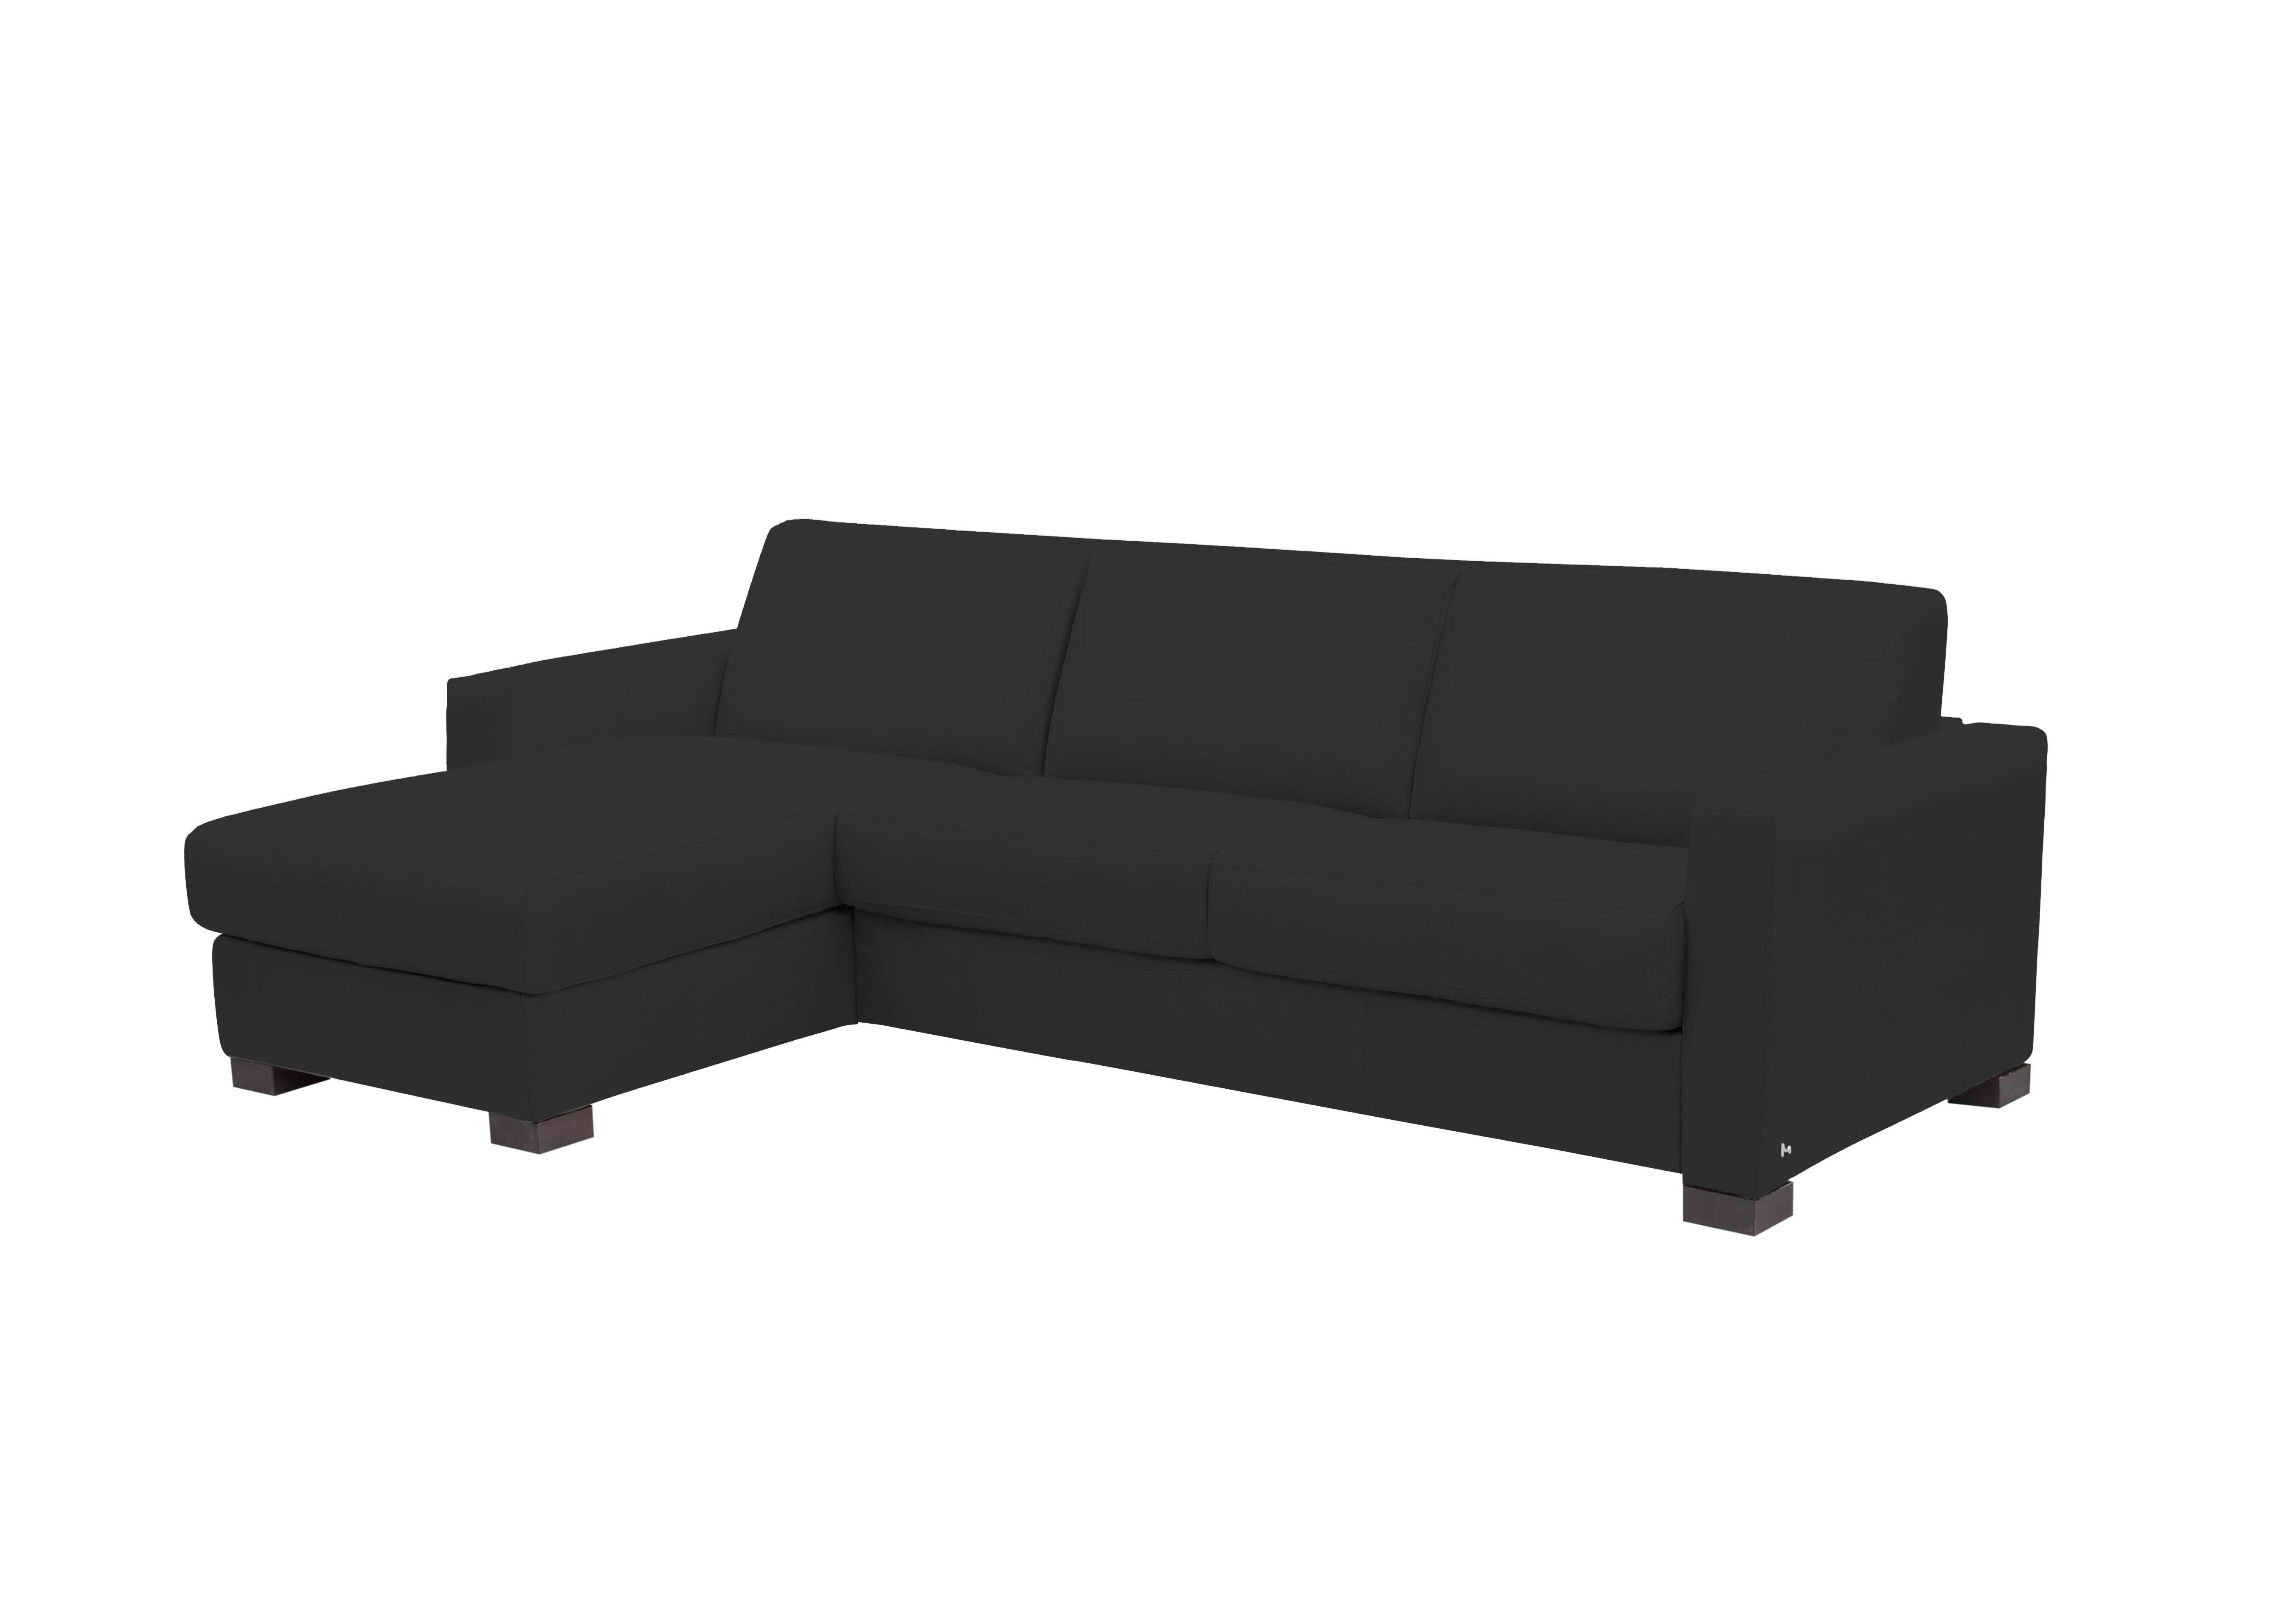 Alcova 3 Seater Leather Sofa Bed with Storage Chaise and Box Arms in Torello Nero 71 on Furniture Village